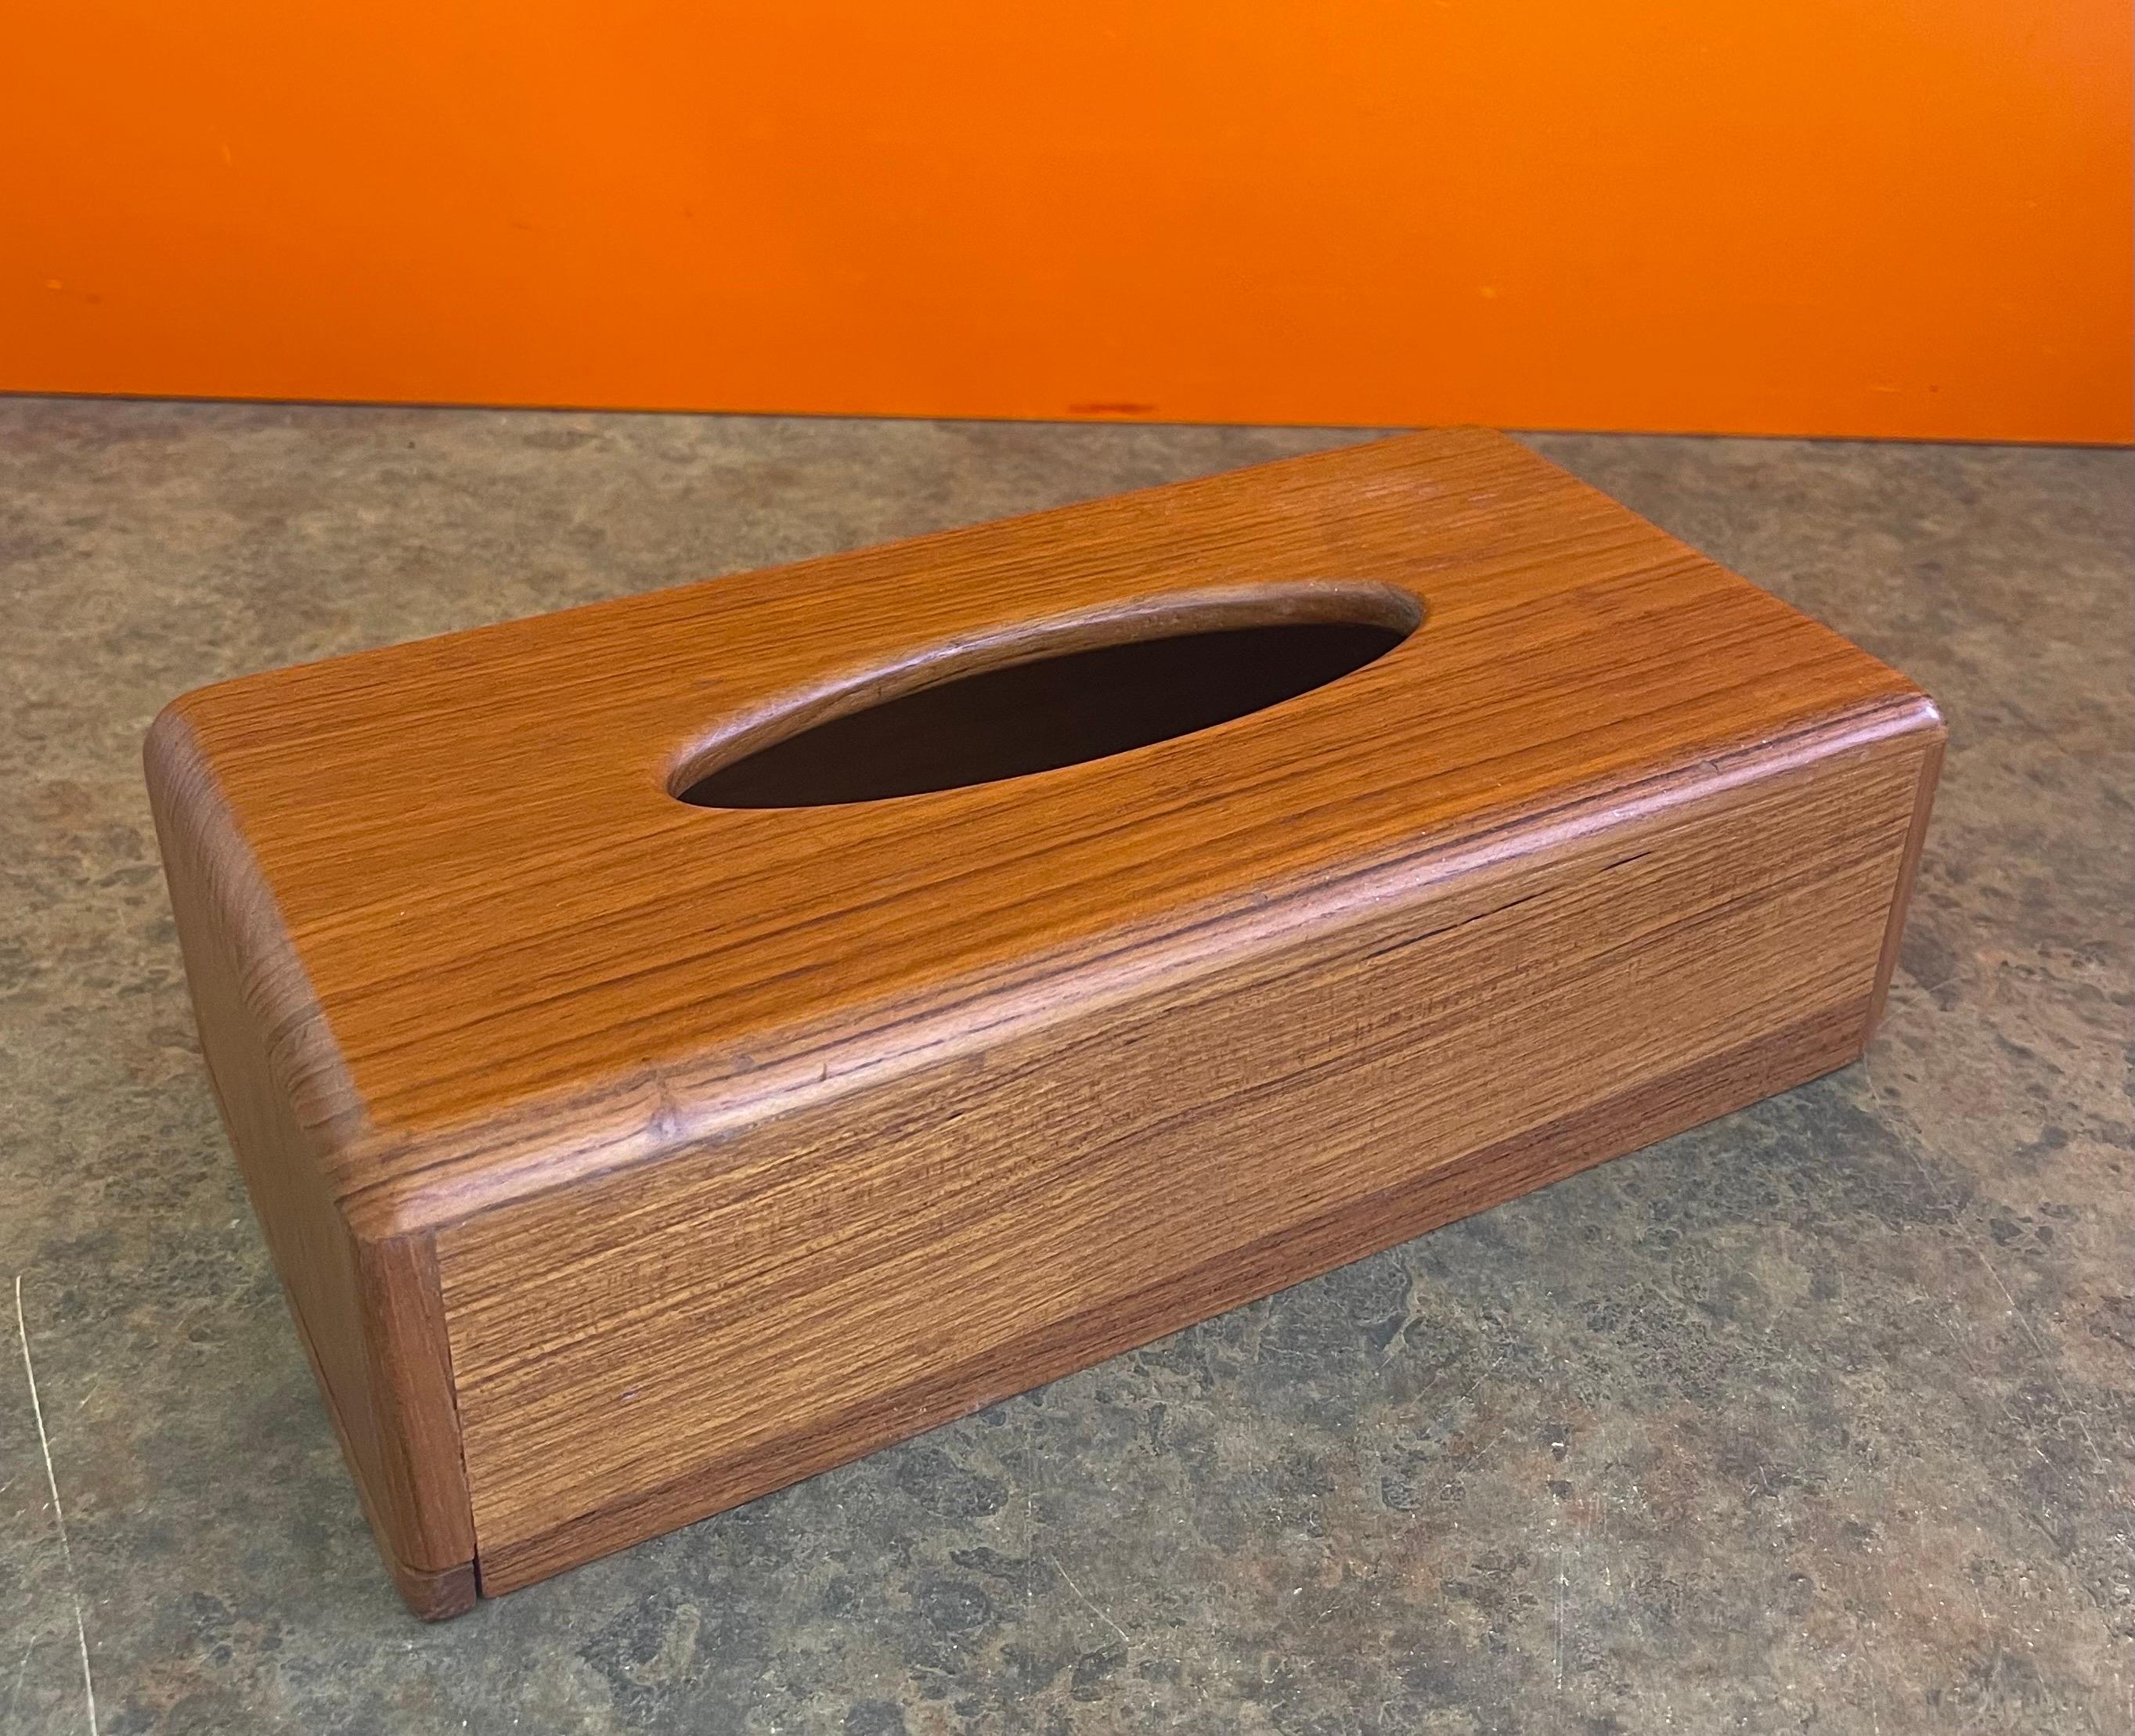 A very nice MCM teak tissue box cover, circa 1970s. The box is in very good vintage condition and measures: 11